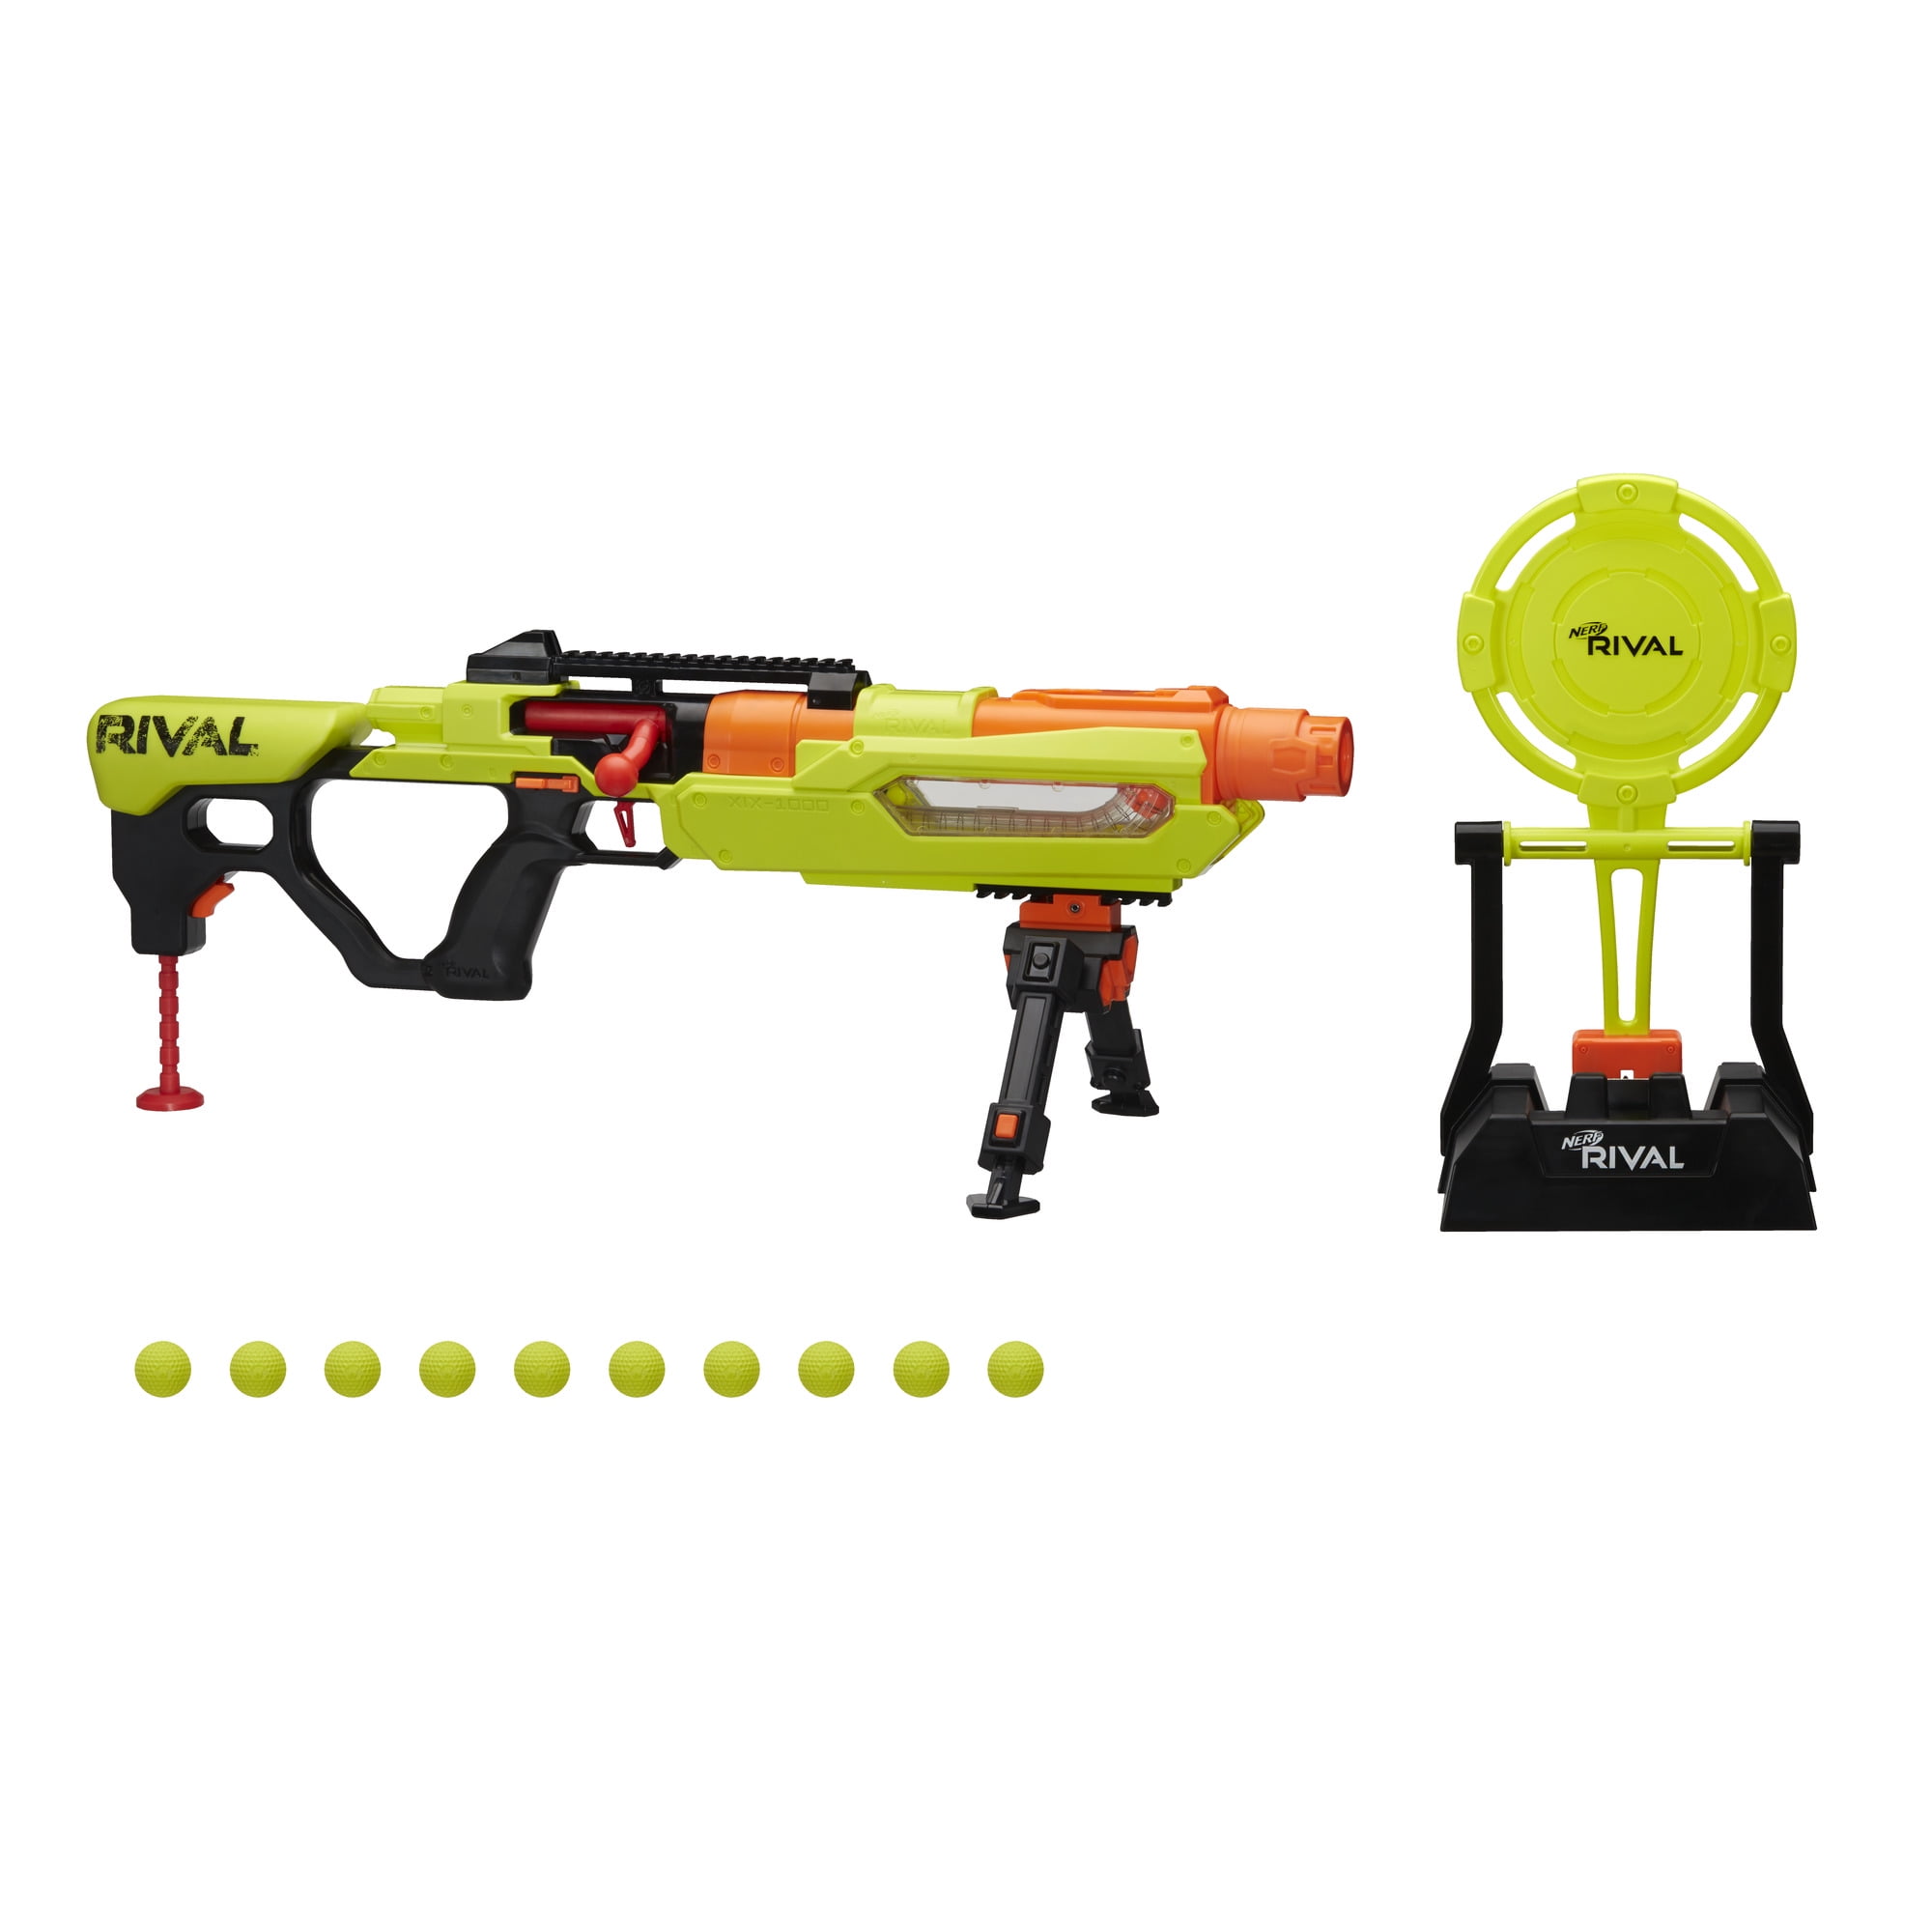 NERF Rival Blaster Jupiter XIX-1000 Edge Series with Target and 10 Rounds Gun for sale online 